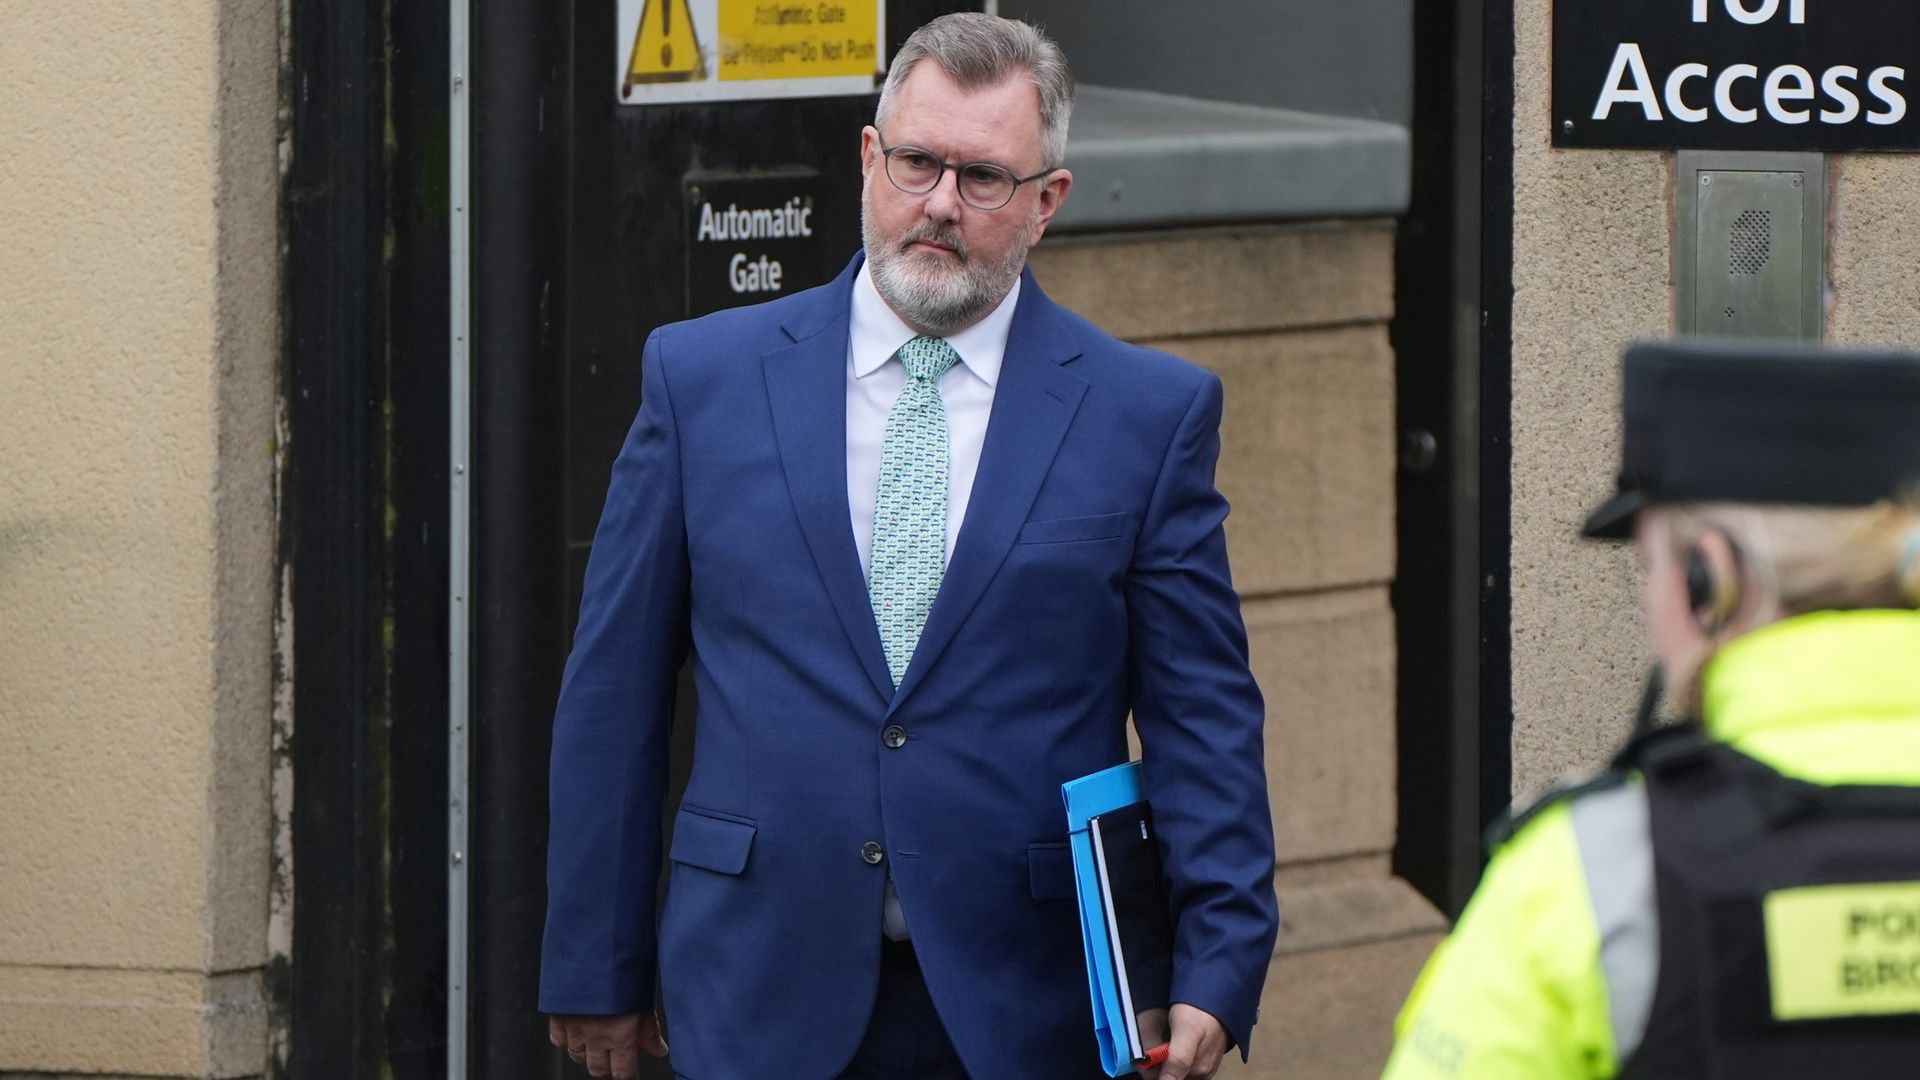 Ex-DUP leader to face trial over 18 sex offence allegations